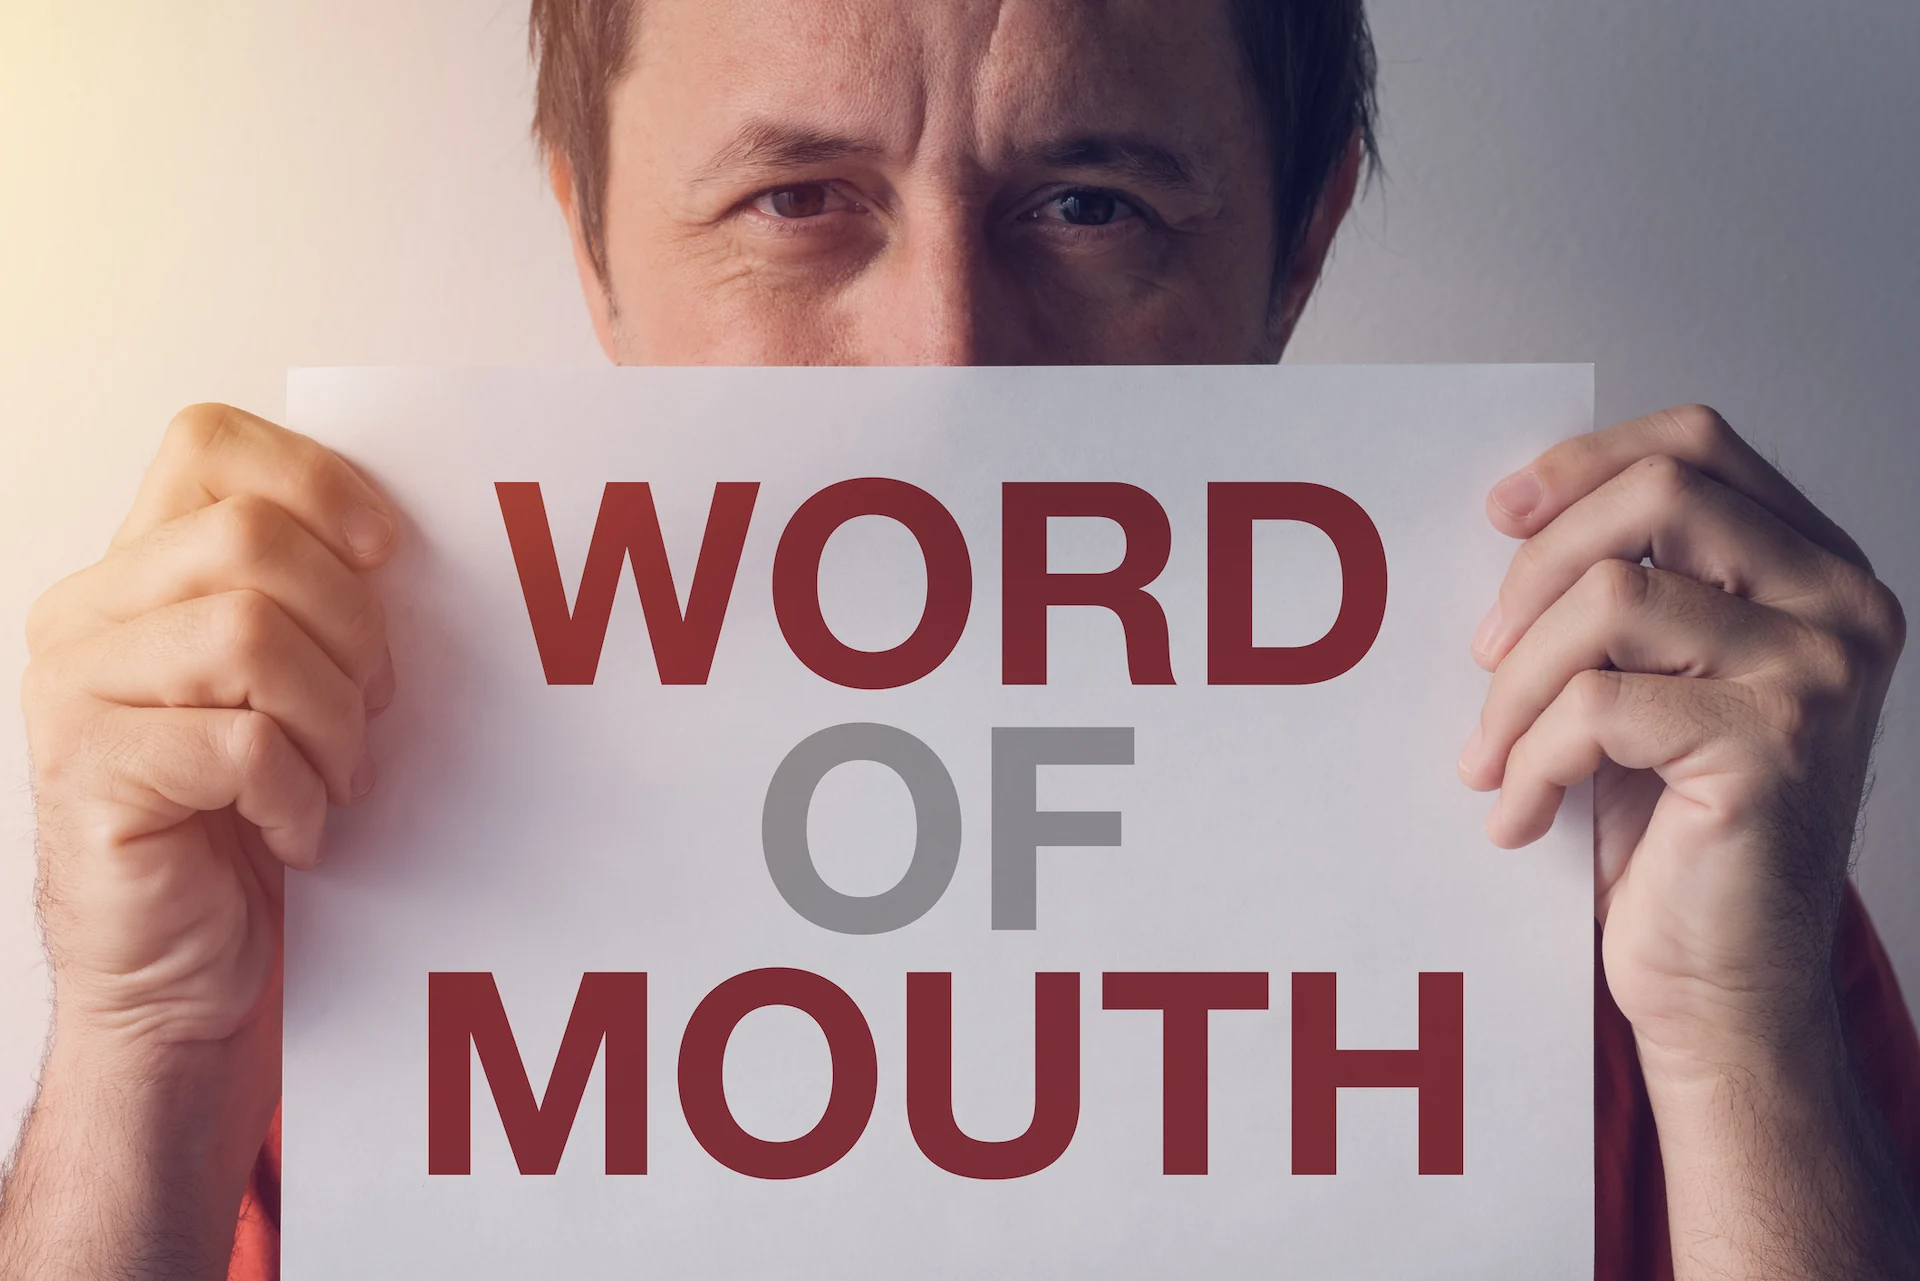 Close up on a person holding a sign that reads "Word Of Mouth" in front of their mouth. While word of mouth is important for a pool builder business, other marketing channels are necessary to generate leads.